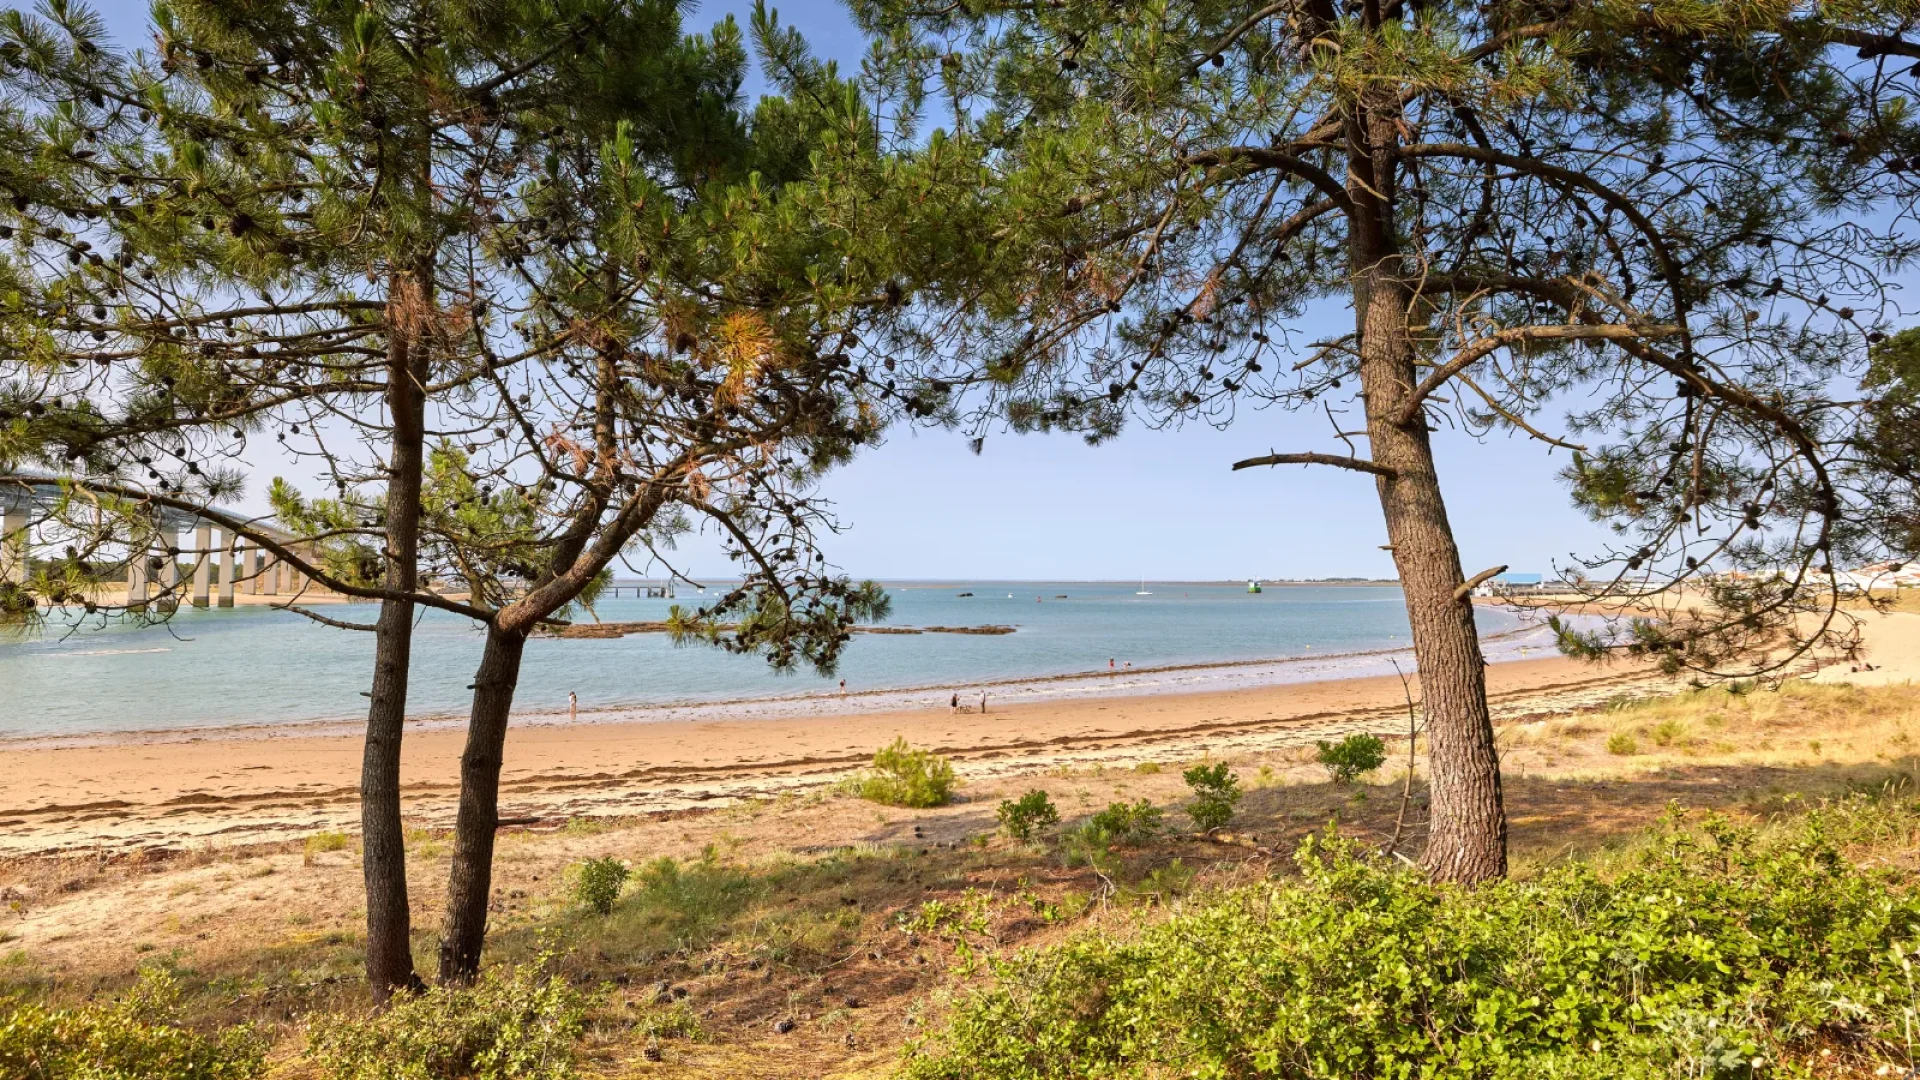 View of the wild part of Fromentine beach at la barre de monts - fromentine